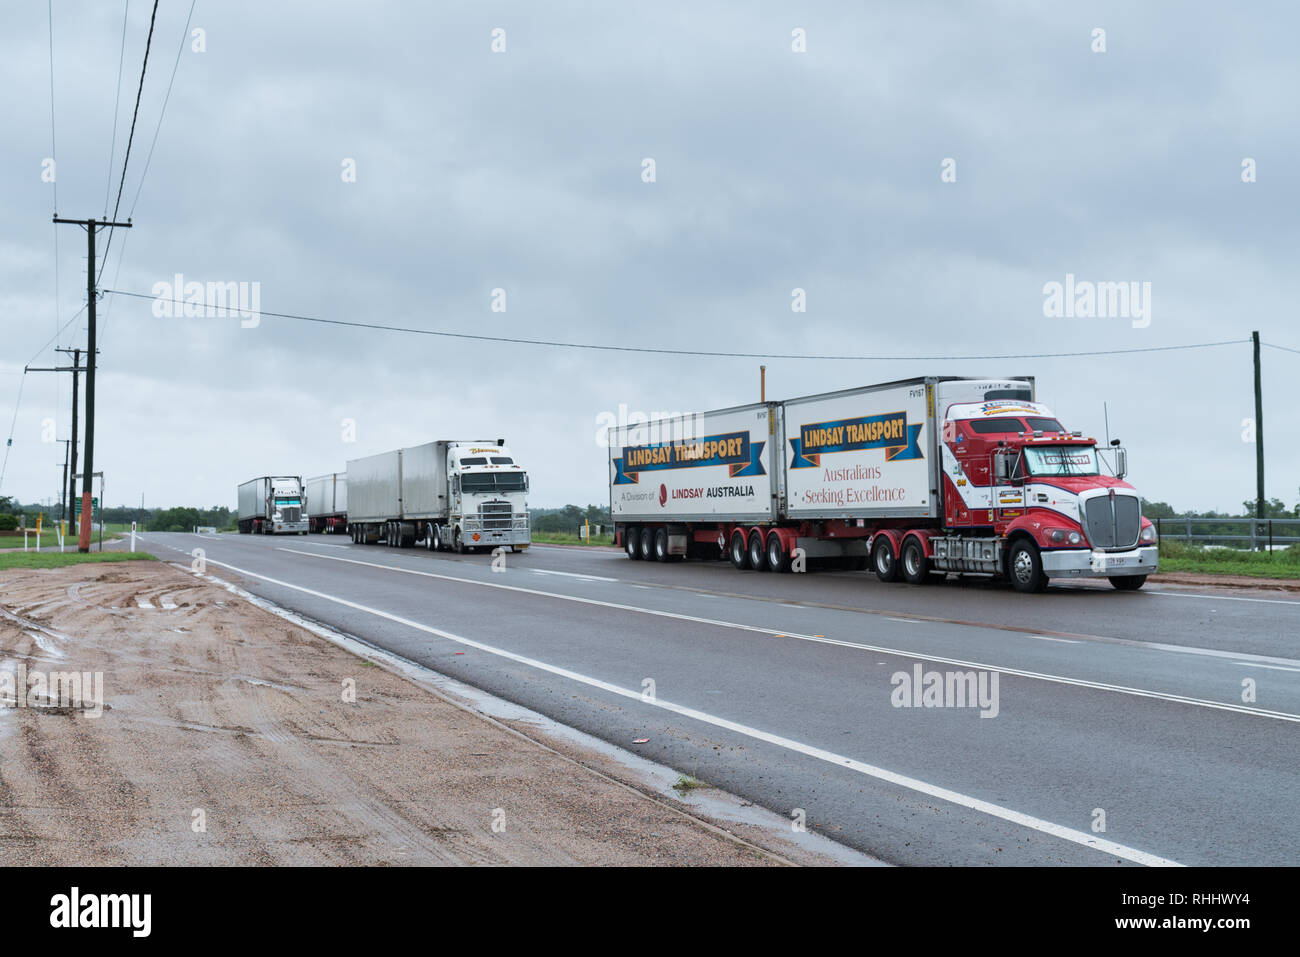 North Queensland, Australia. 3rd Feb 2019. The flooded Burdekin River at Macrossan has trucks lined up in Charters Towers waiting for flood waters to recede. Credit: Sheralee Stoll/Alamy Live News Stock Photo